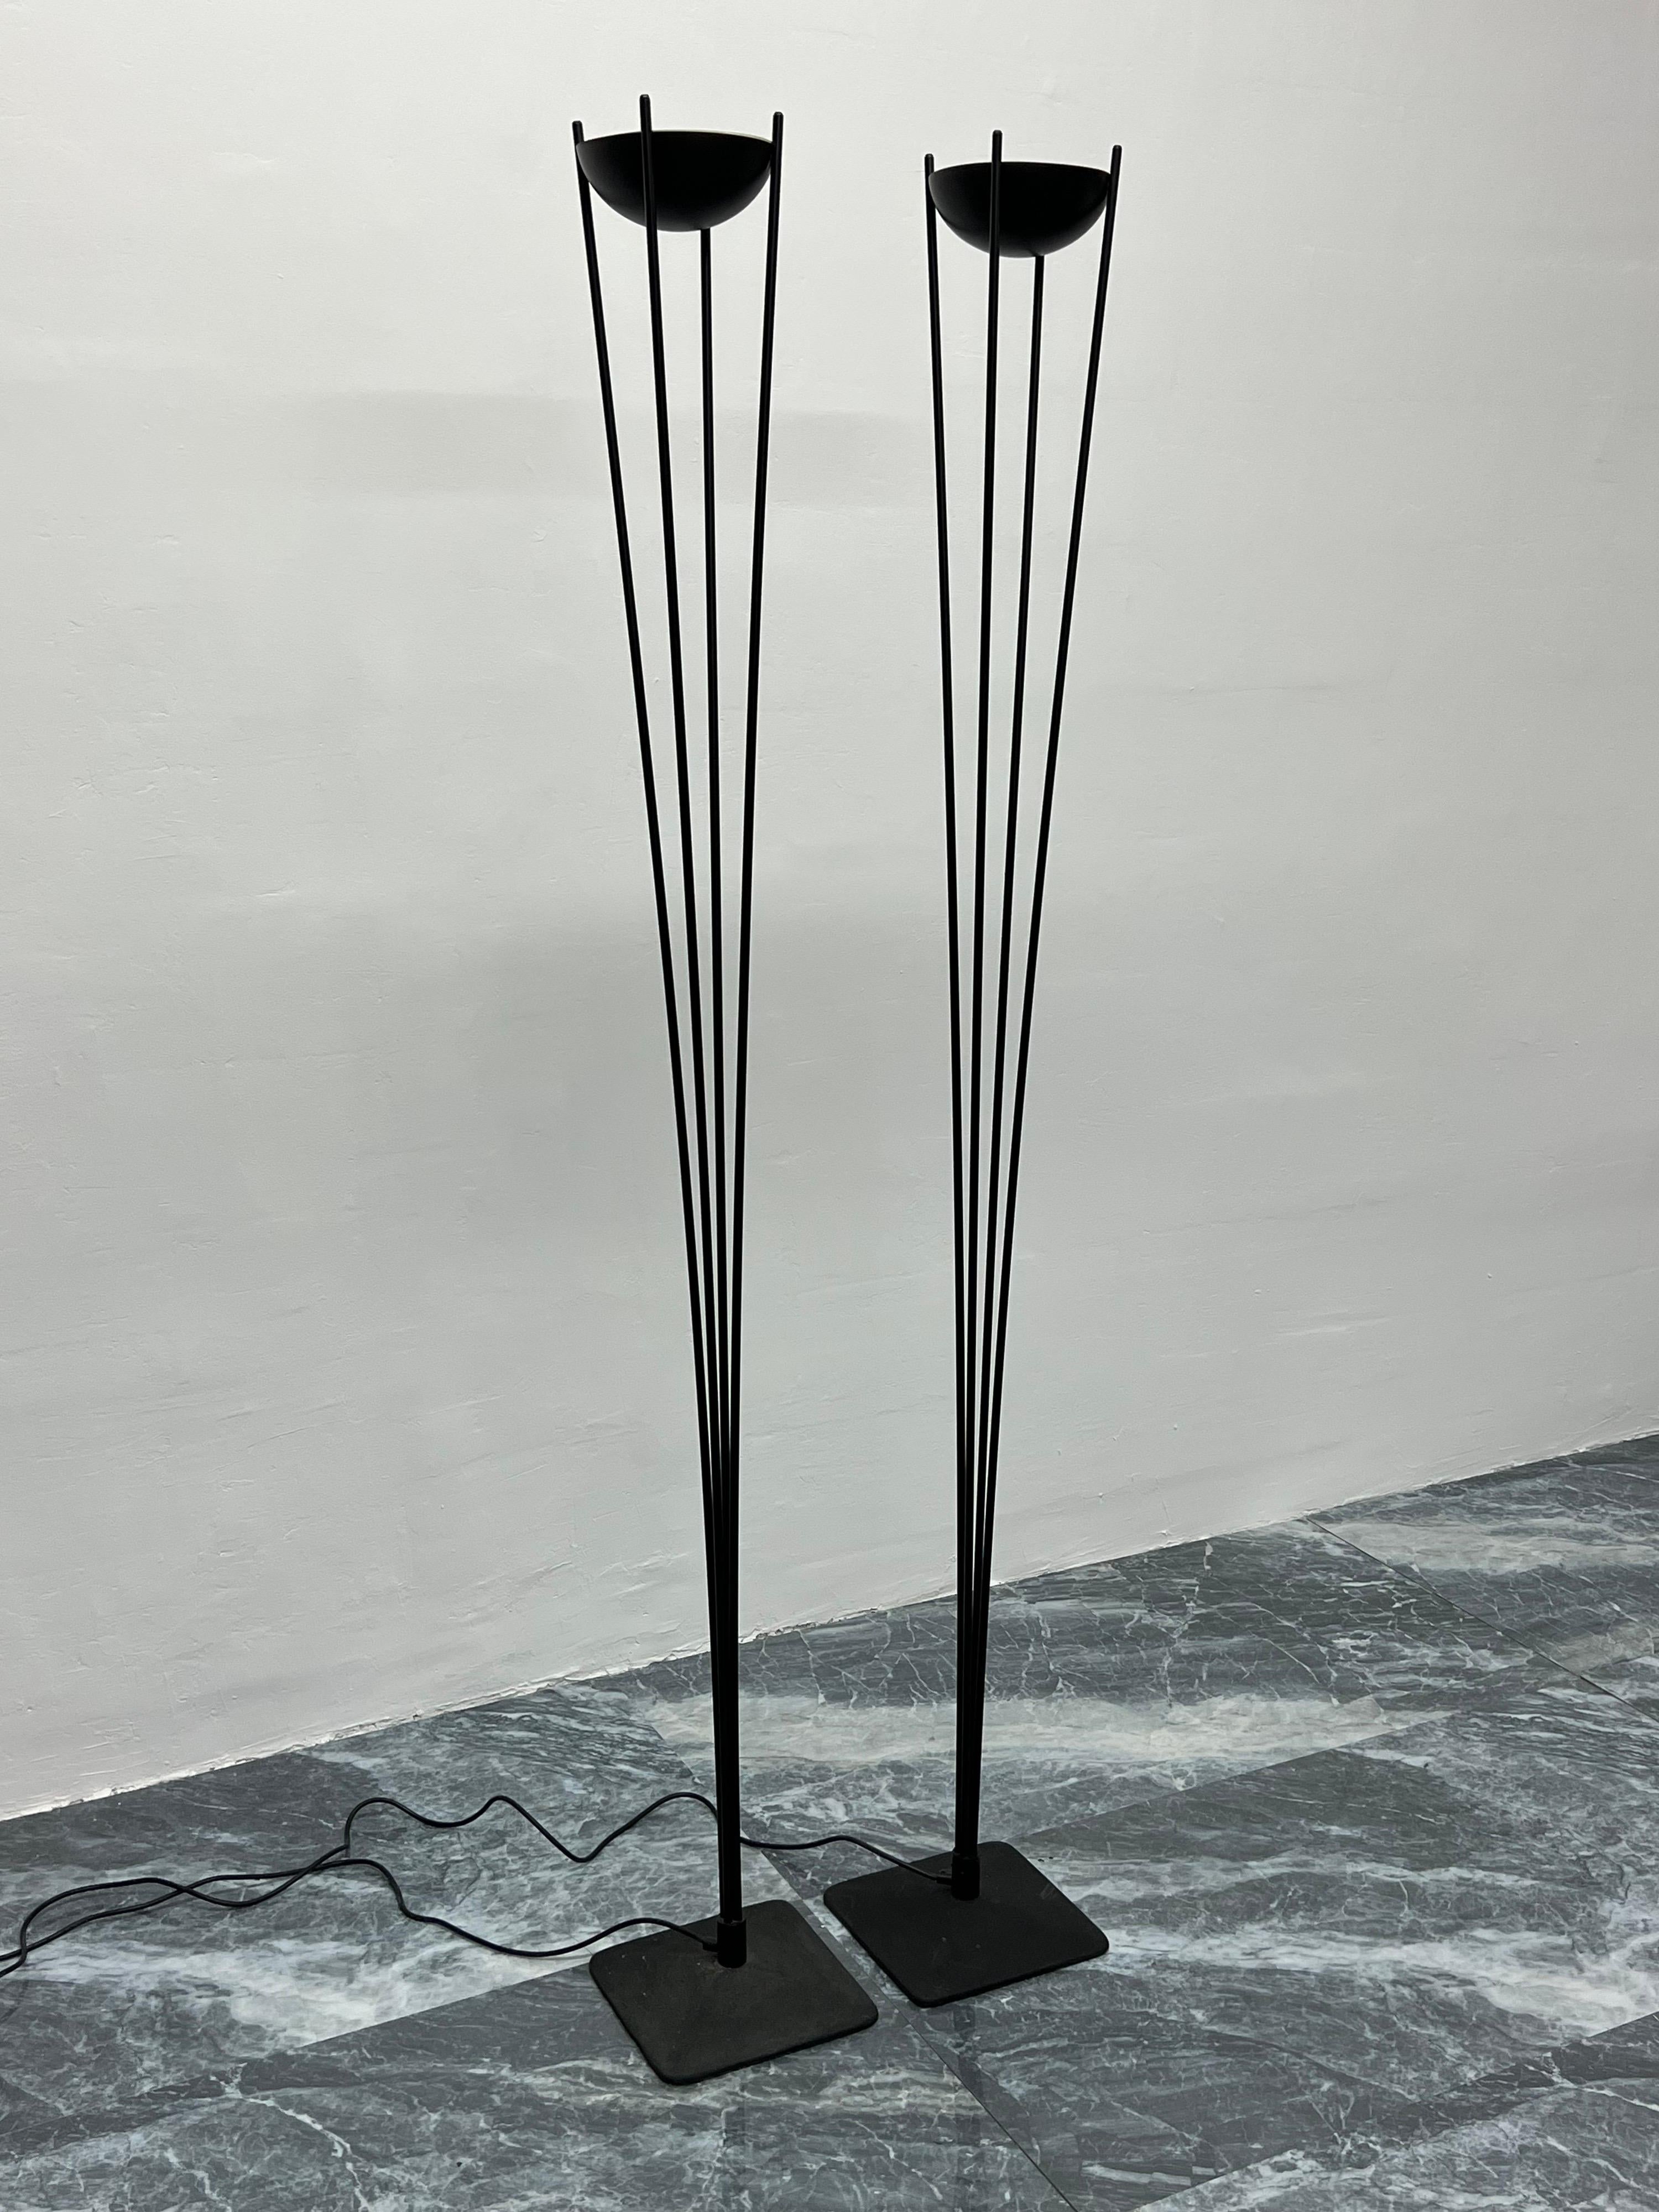 Rare matte black postmodern torchiere floor lamps with dimmable halogen bulbs by Koch & Lowy circa 1980s.